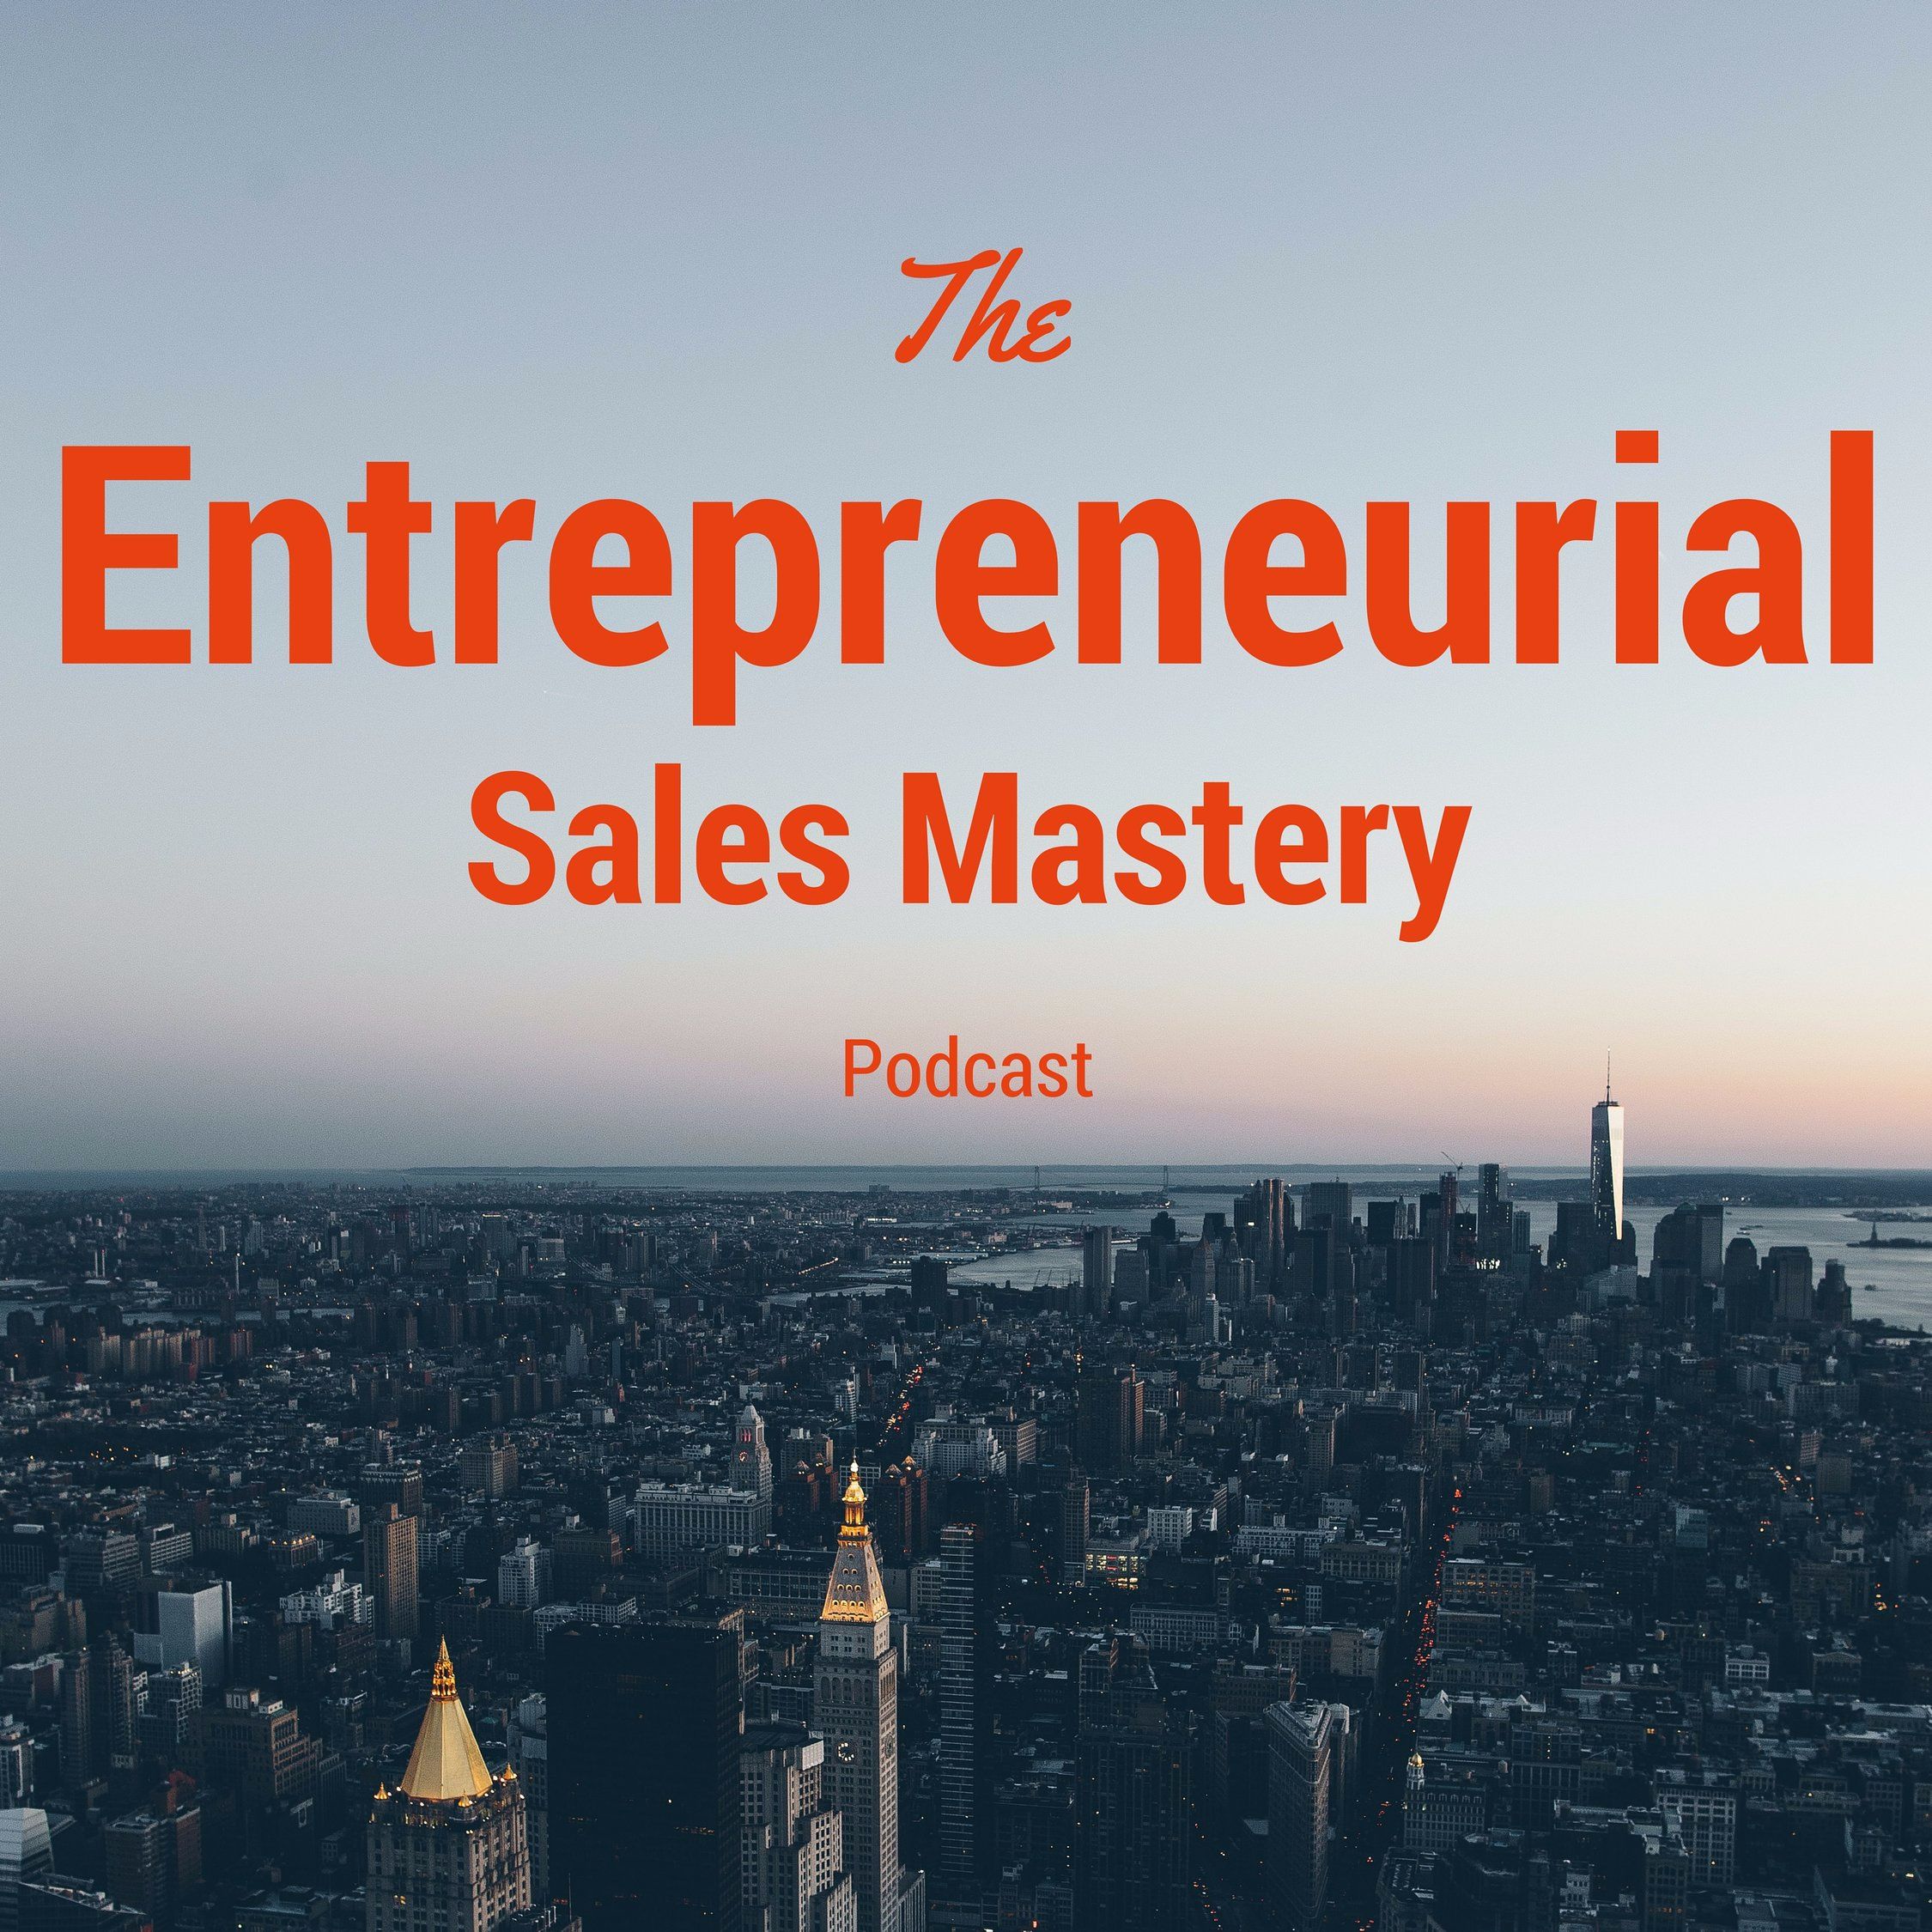 Entrepreneurial Sales Mastery Podcast